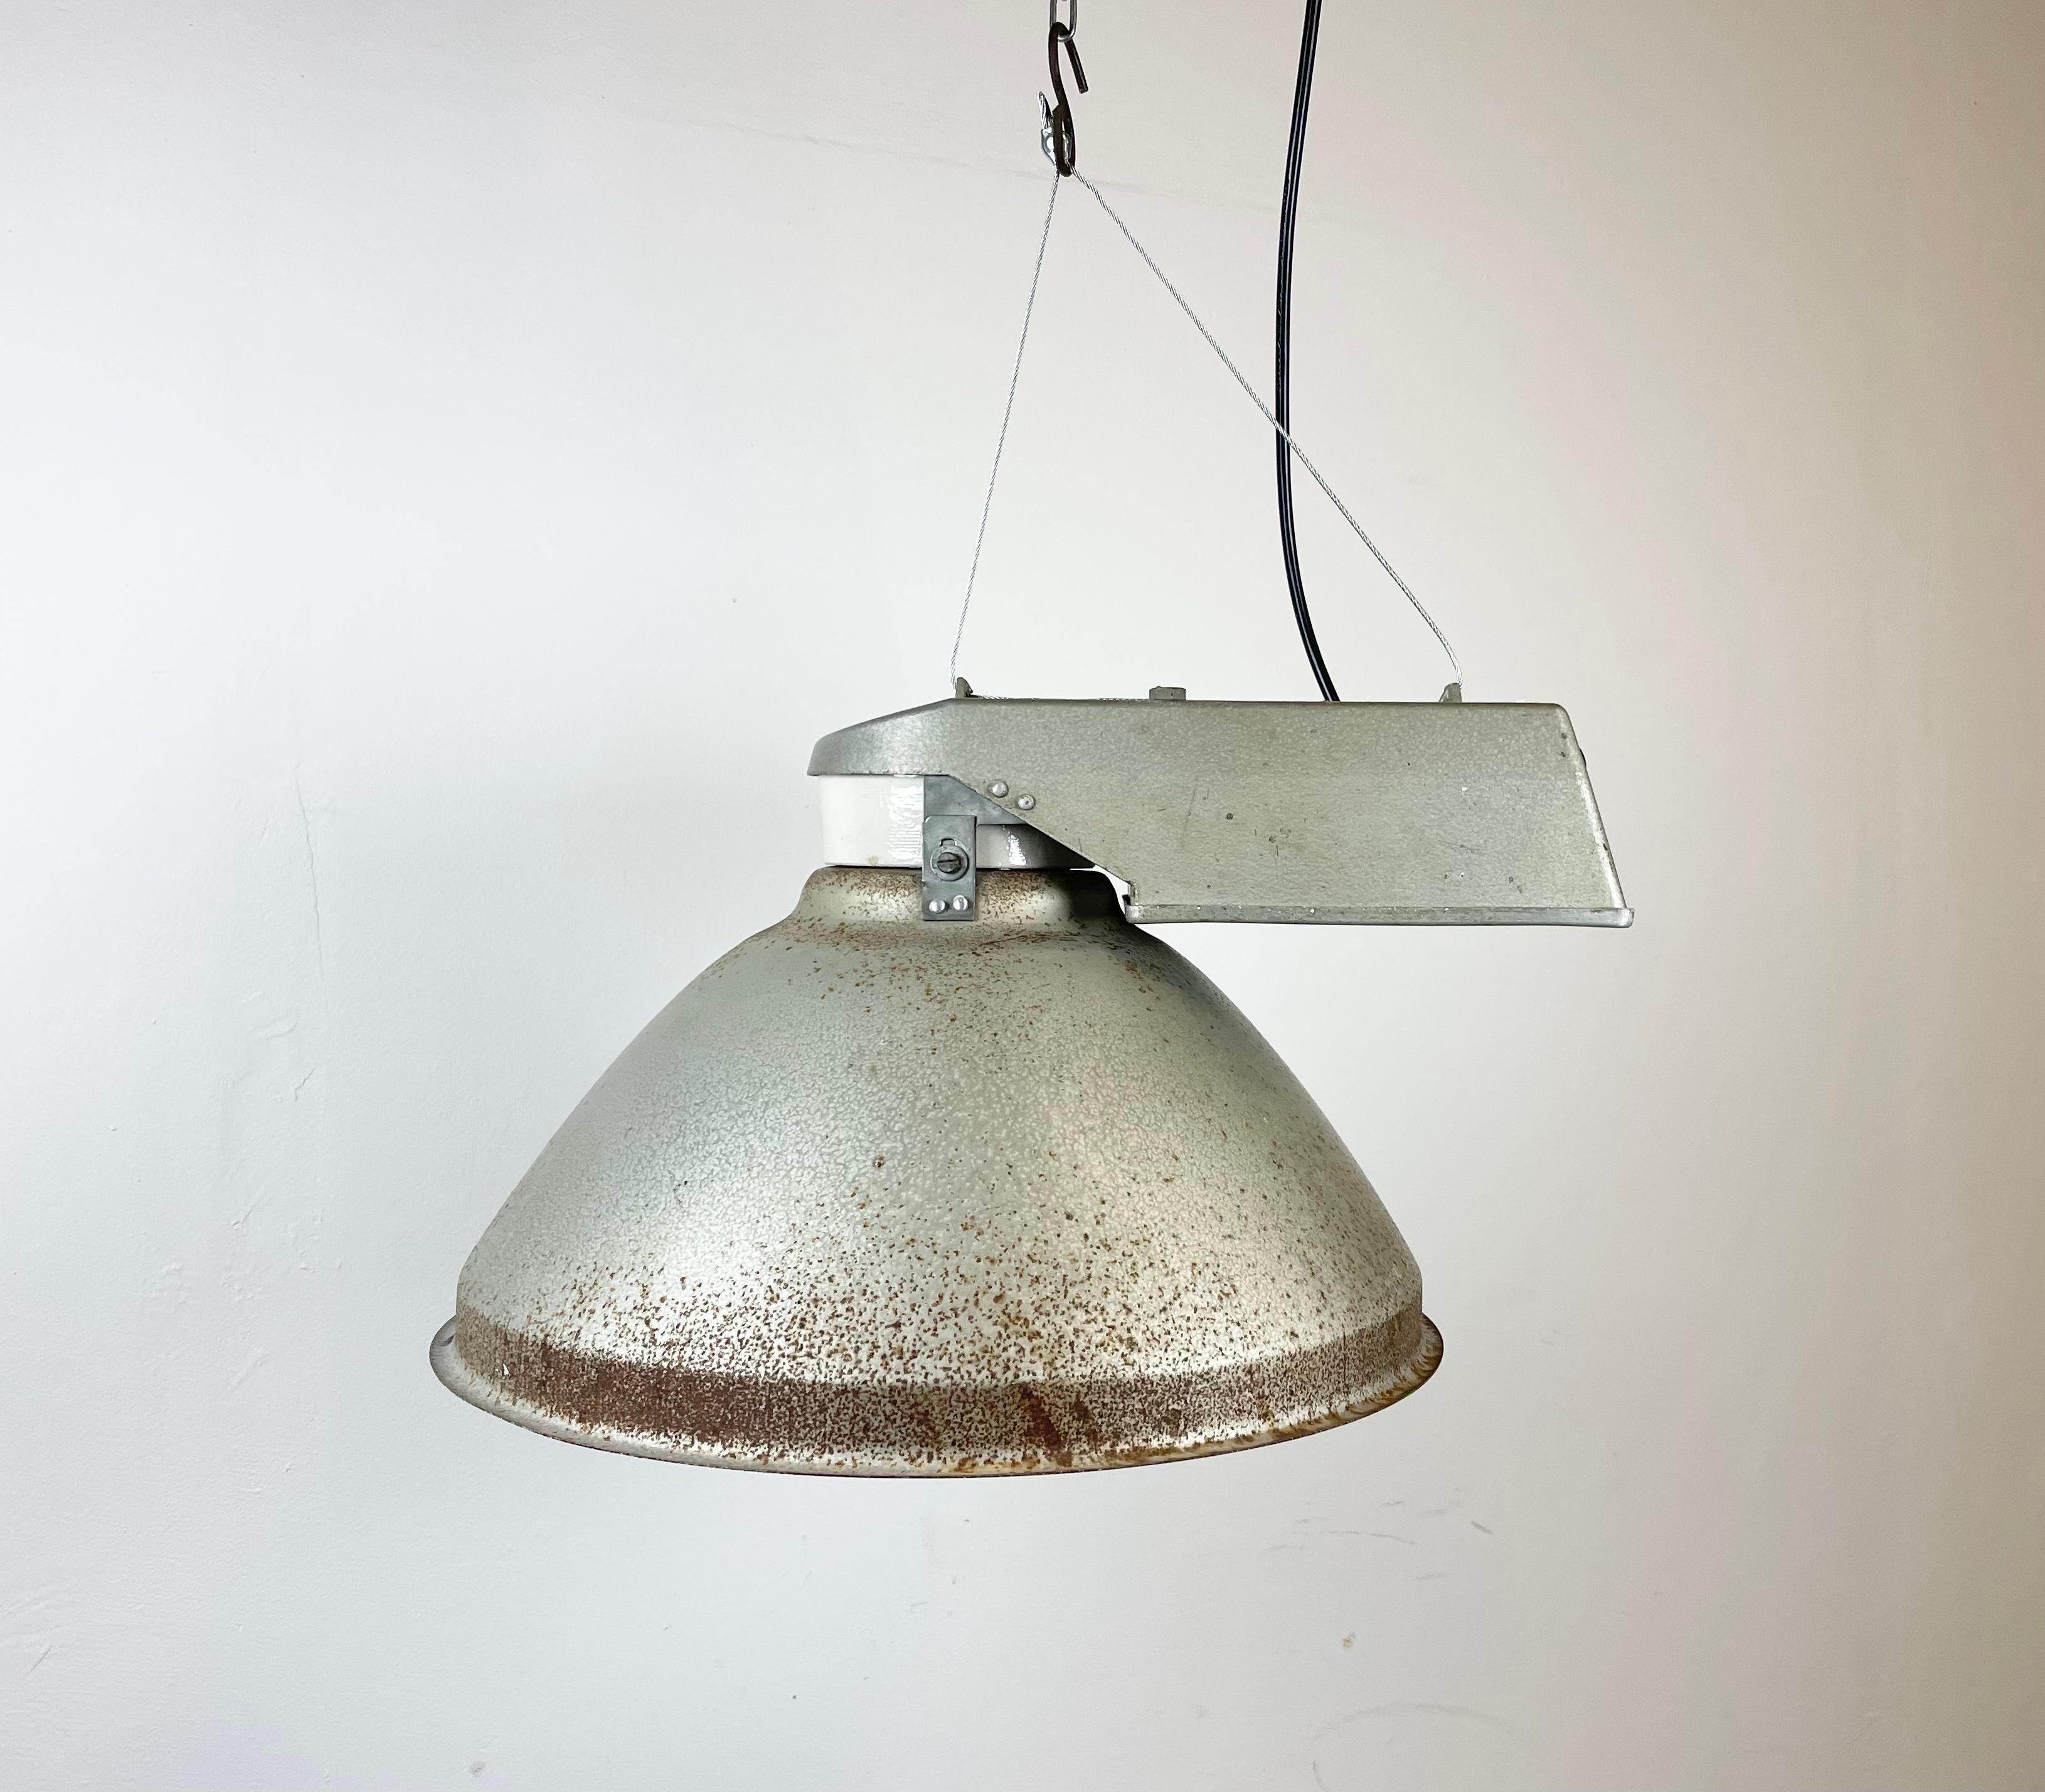 Vintage industrial hanging lamp manufactured in 1970s by MESKO in Skarzysko-Kamienna in Poland. It features a grey iron lampshade,a cast aluminium top and frosted glass cover. The porcelain socket requires E 27/ E26 light bulbs. New wire. The weight